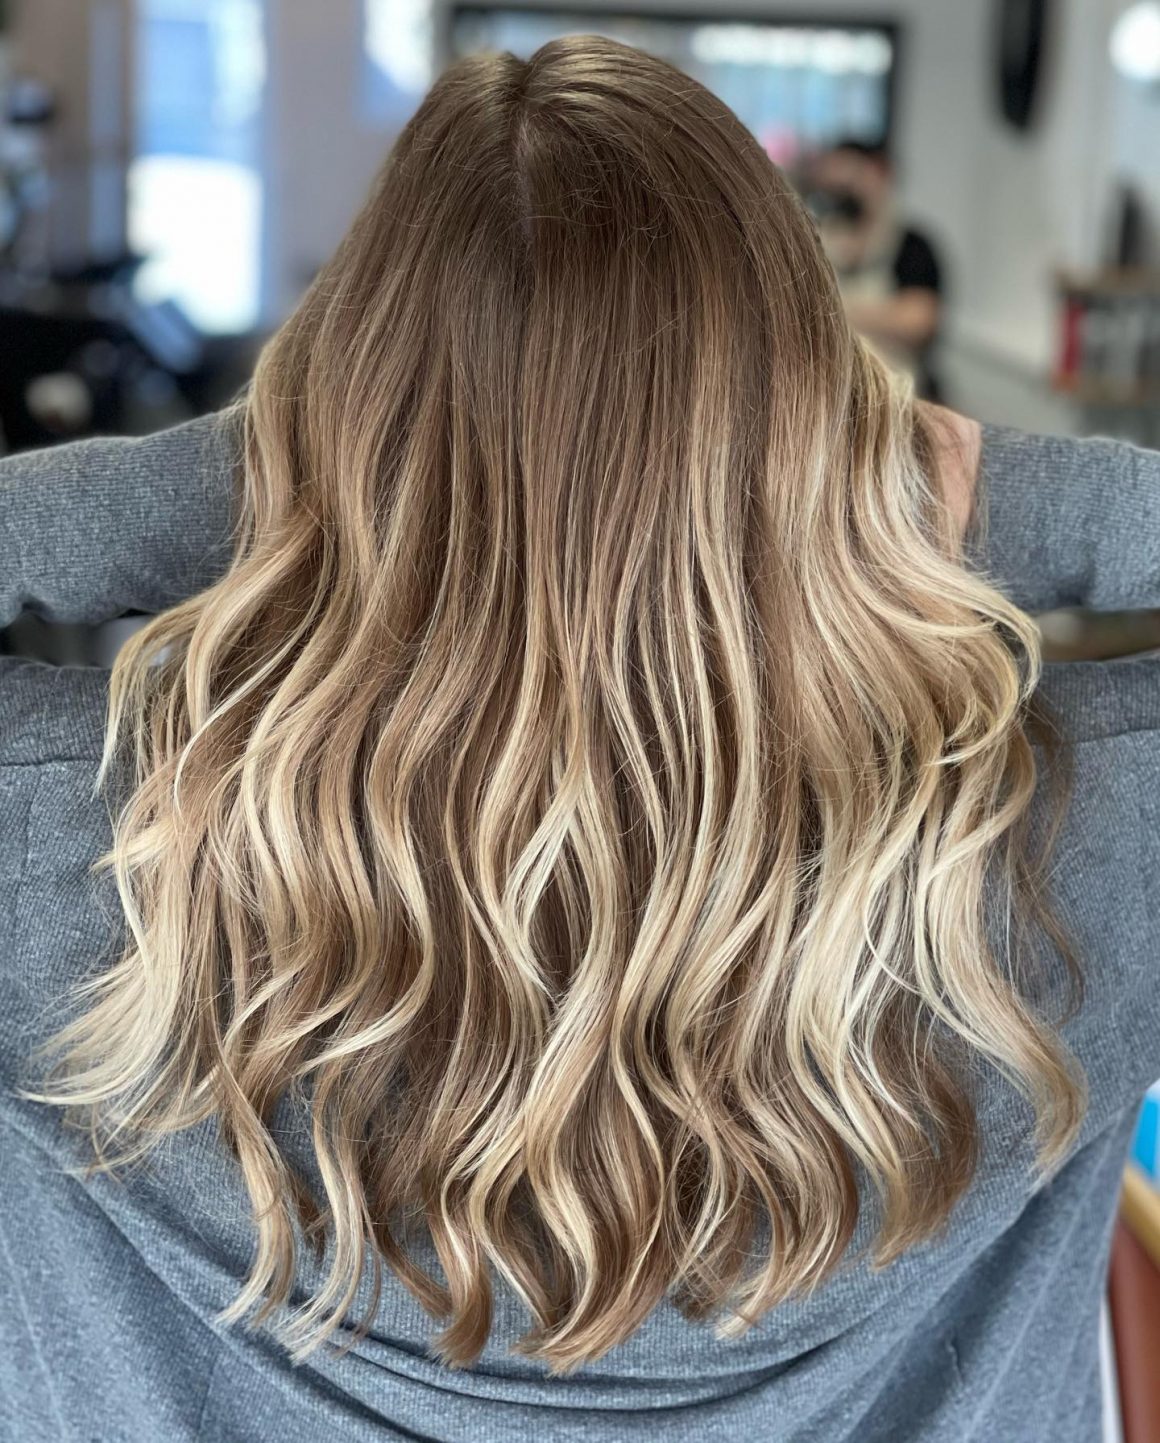 15 Blonde Balayage Hair Ideas You Have To Try This Year - 2Prom Hair Styles